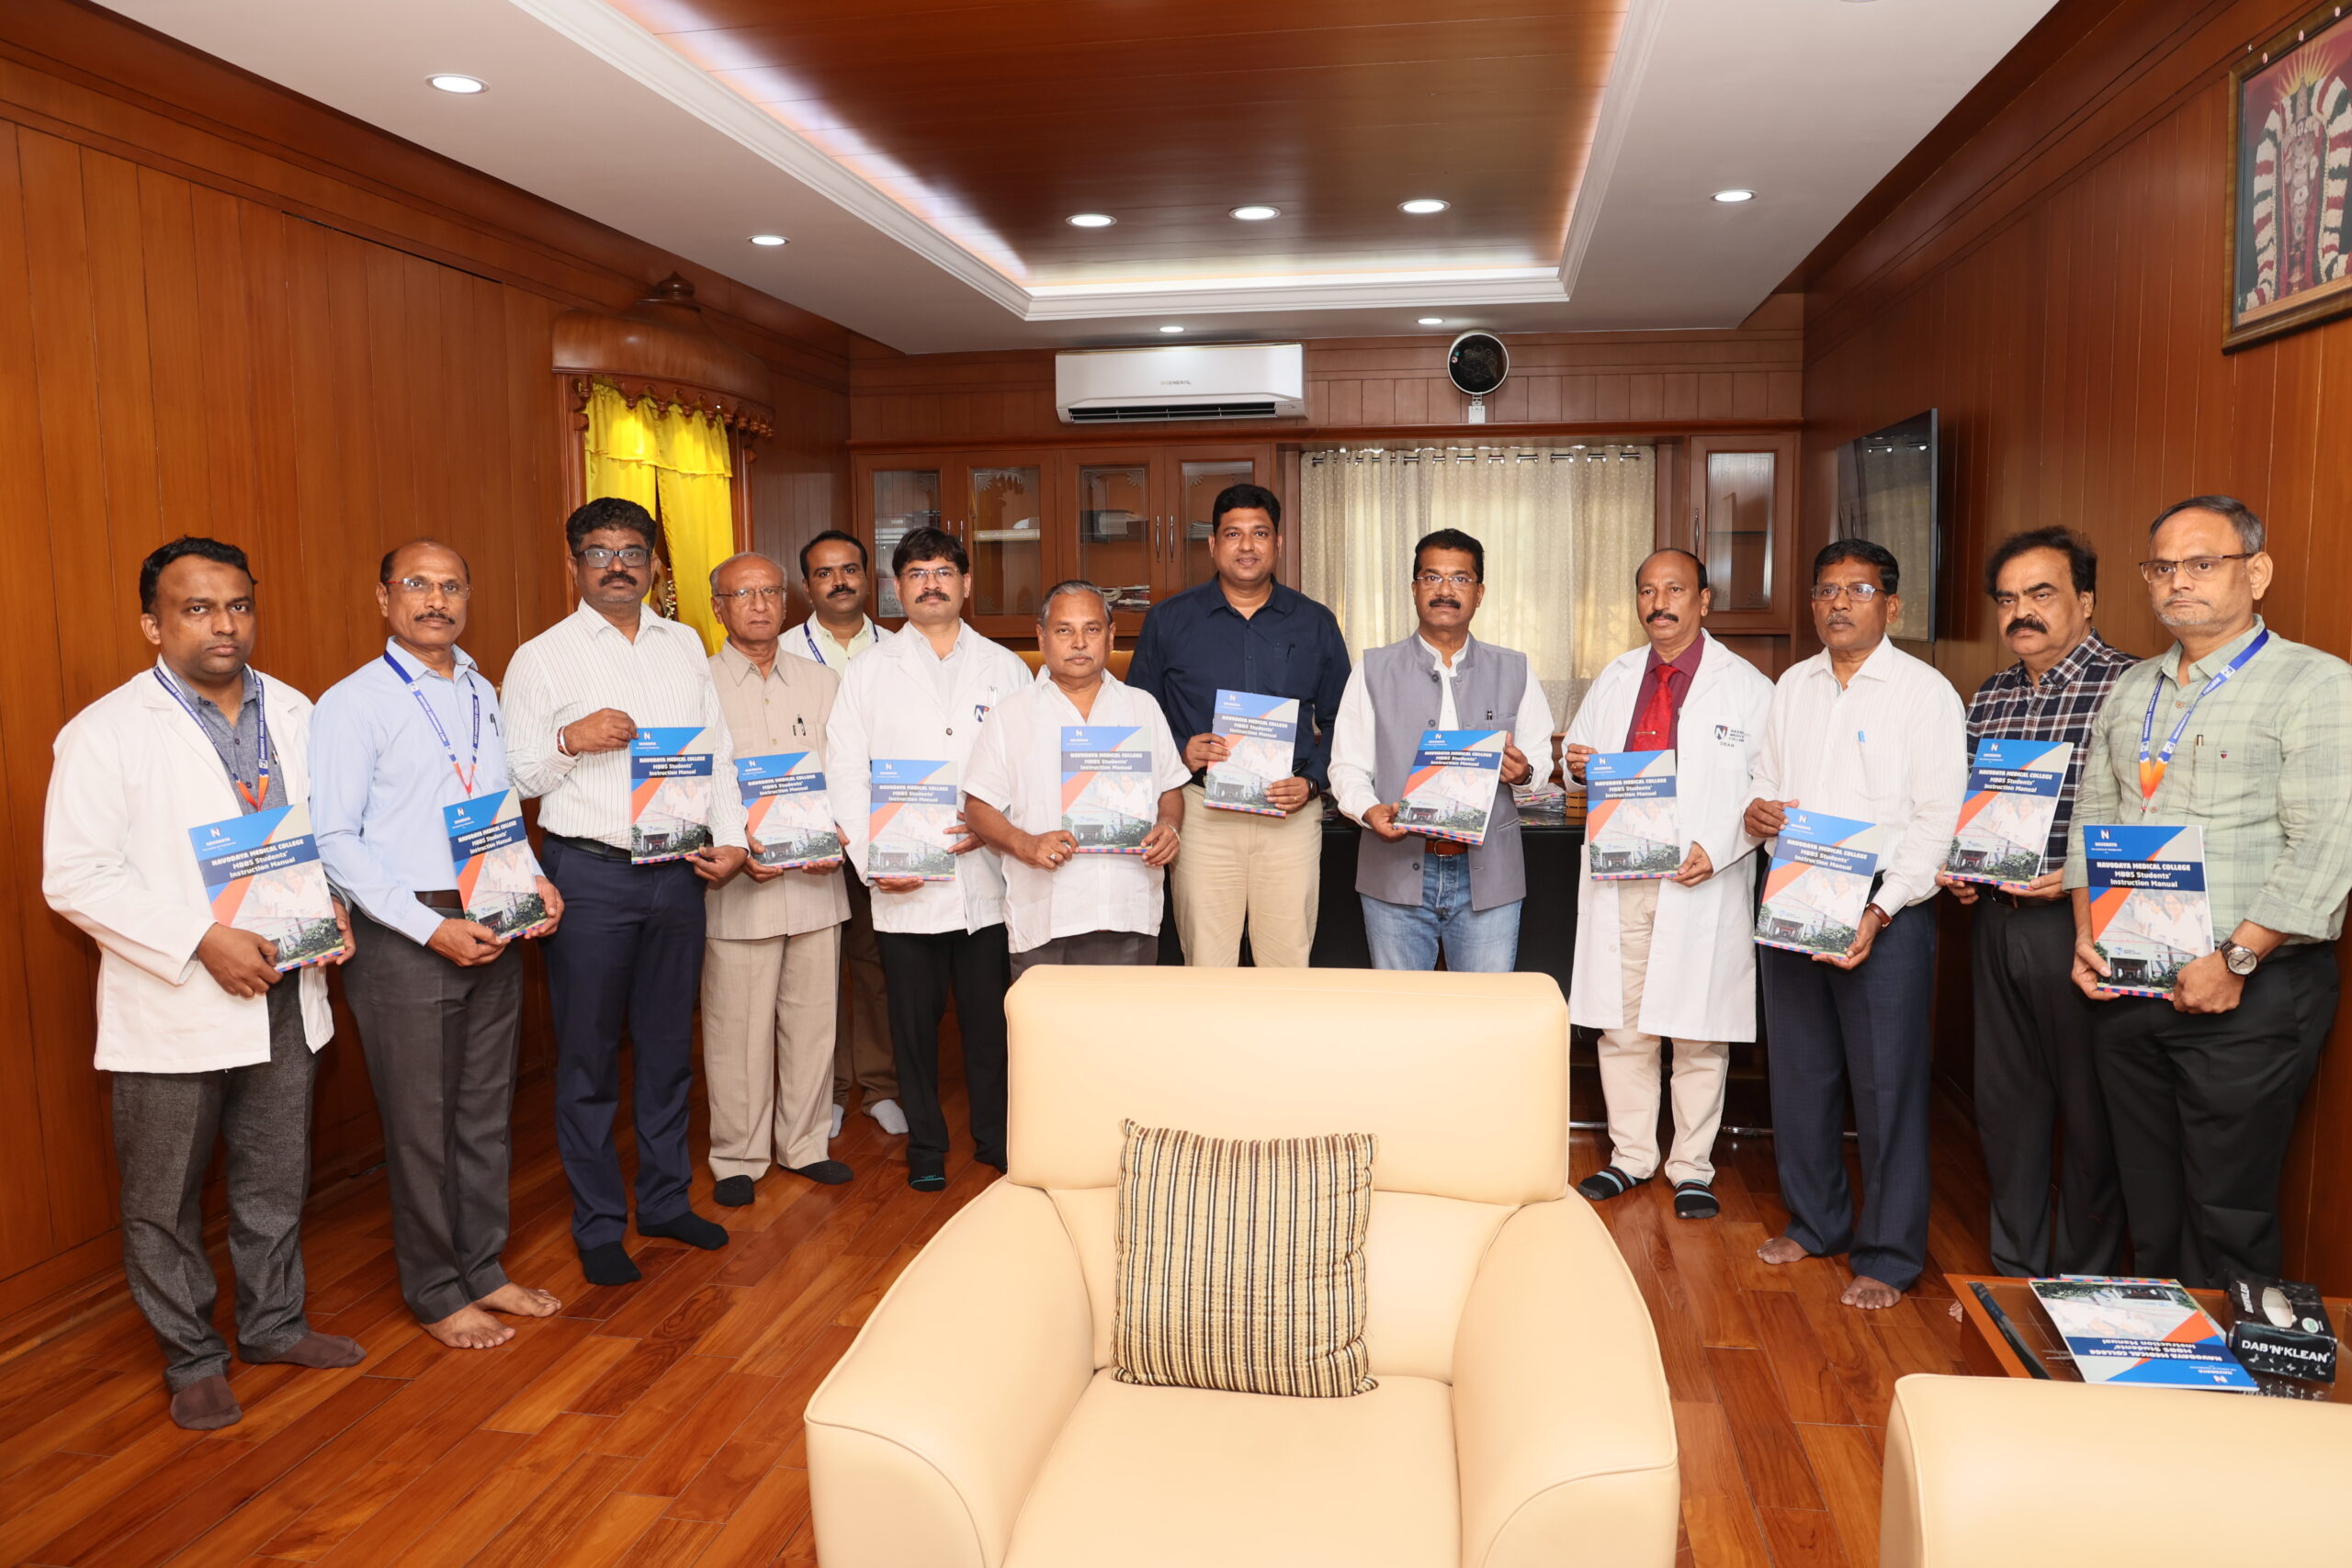 Hon’ble Chairman Shri S R Reddy unveiled the Instruction Manual for MBBS Students.